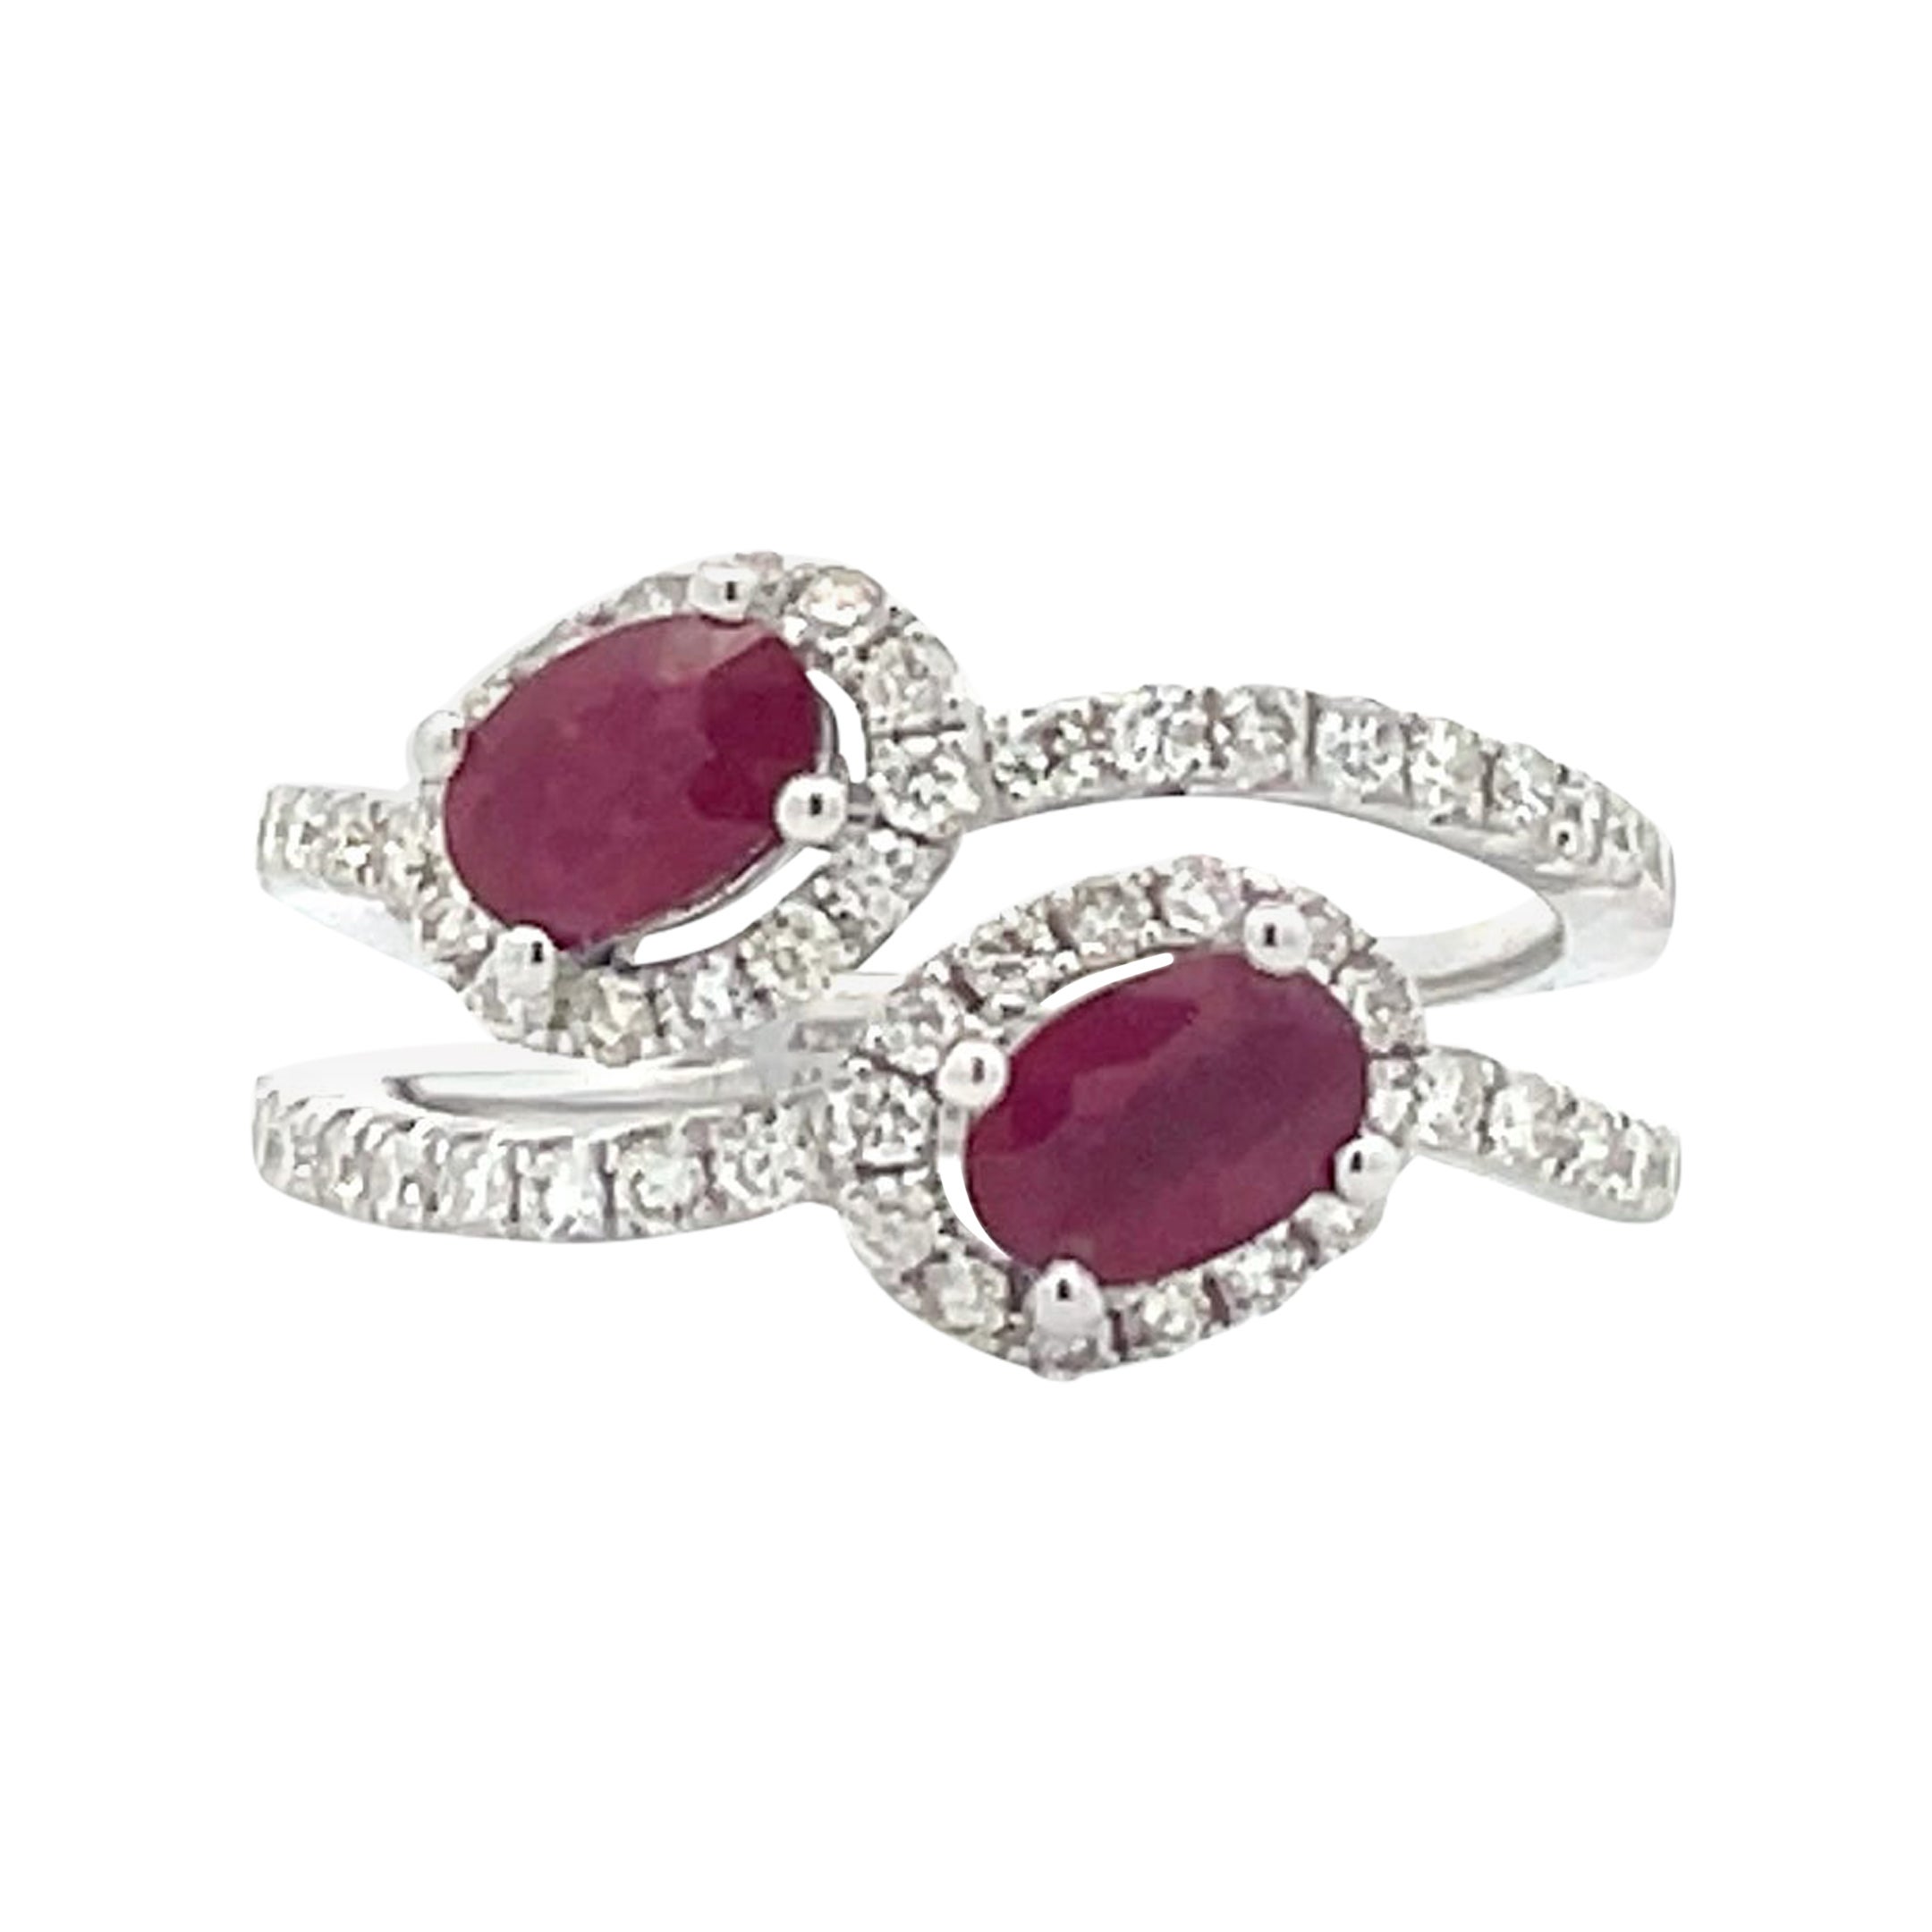 1.06 Carat Oval Ruby and Diamond Halo Crossover Cocktail Ring in 14k Gold